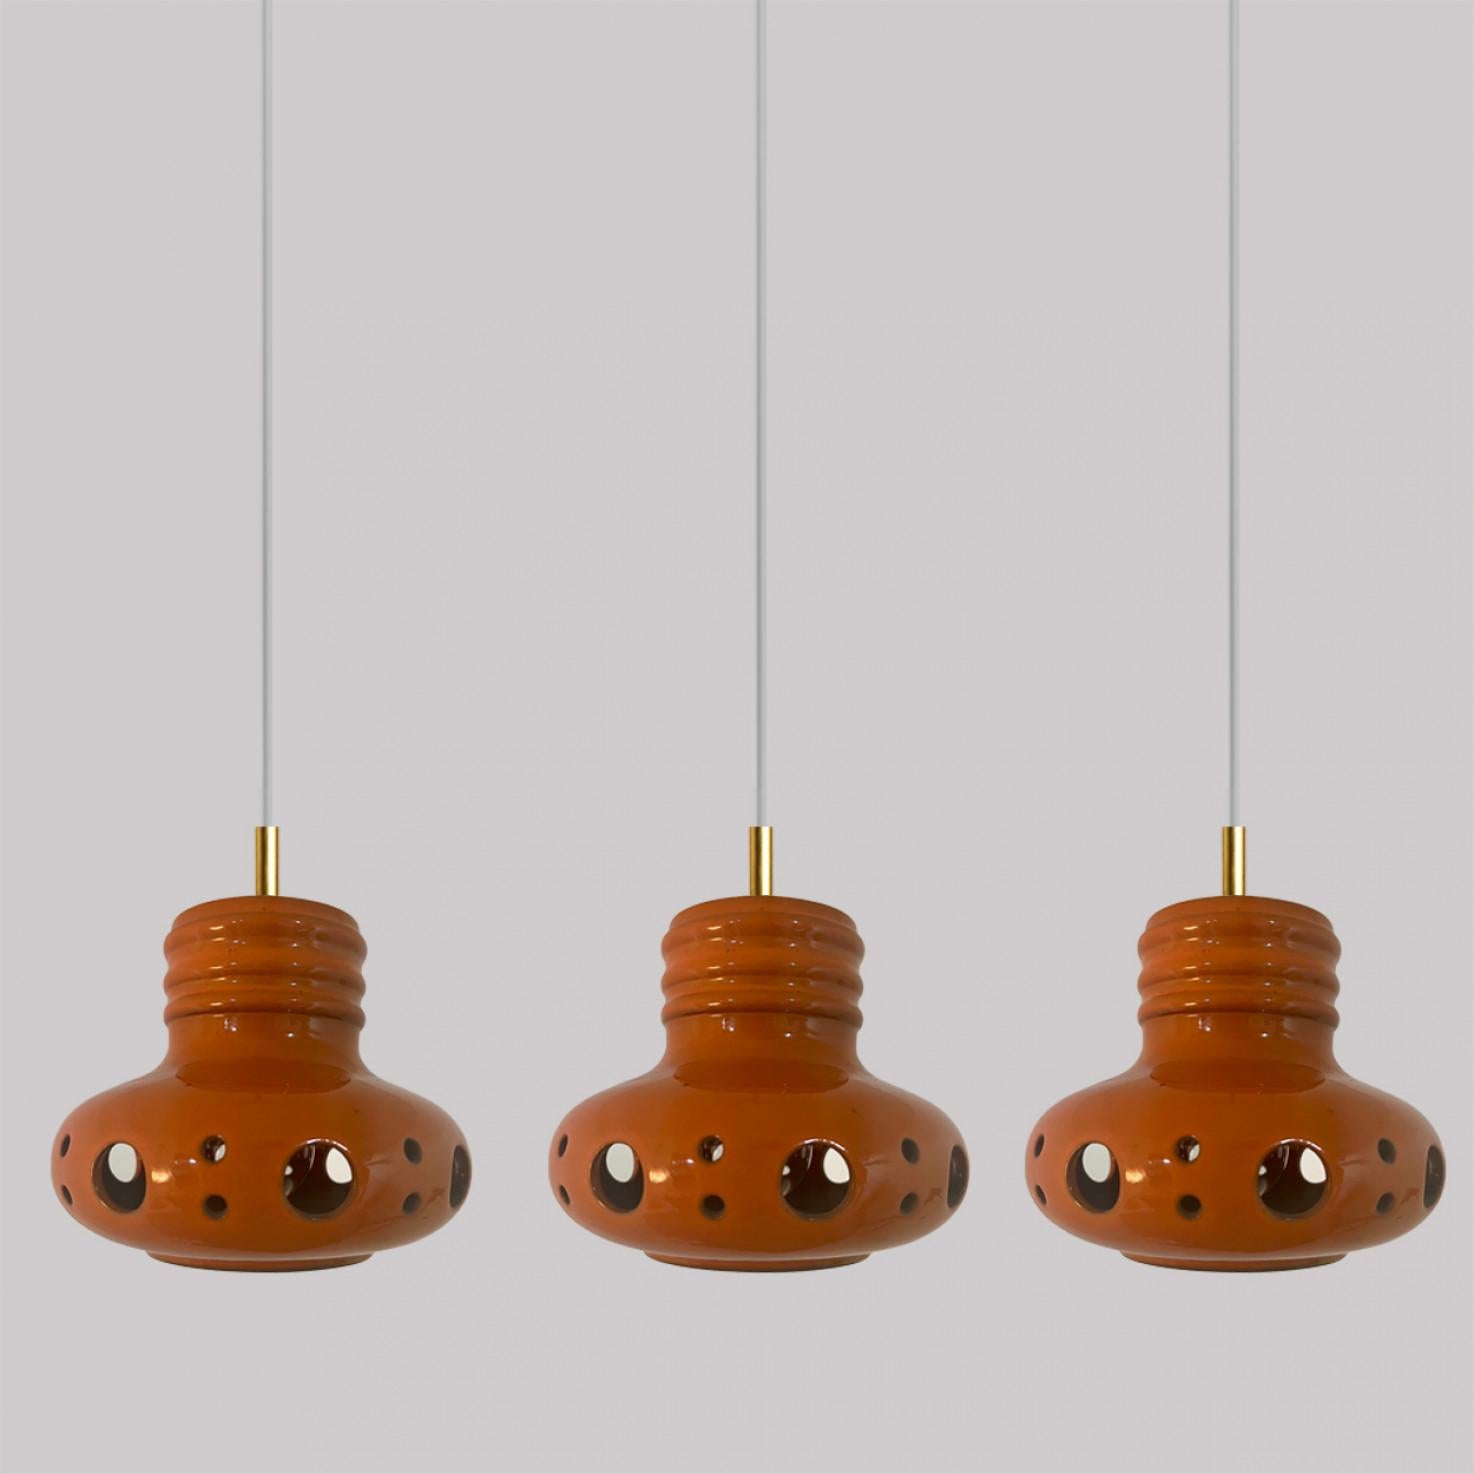 Brass 1 0f the 3 Three Unique Mixed Glazed Ceramic Pendant Lights, Germany, 1970s For Sale